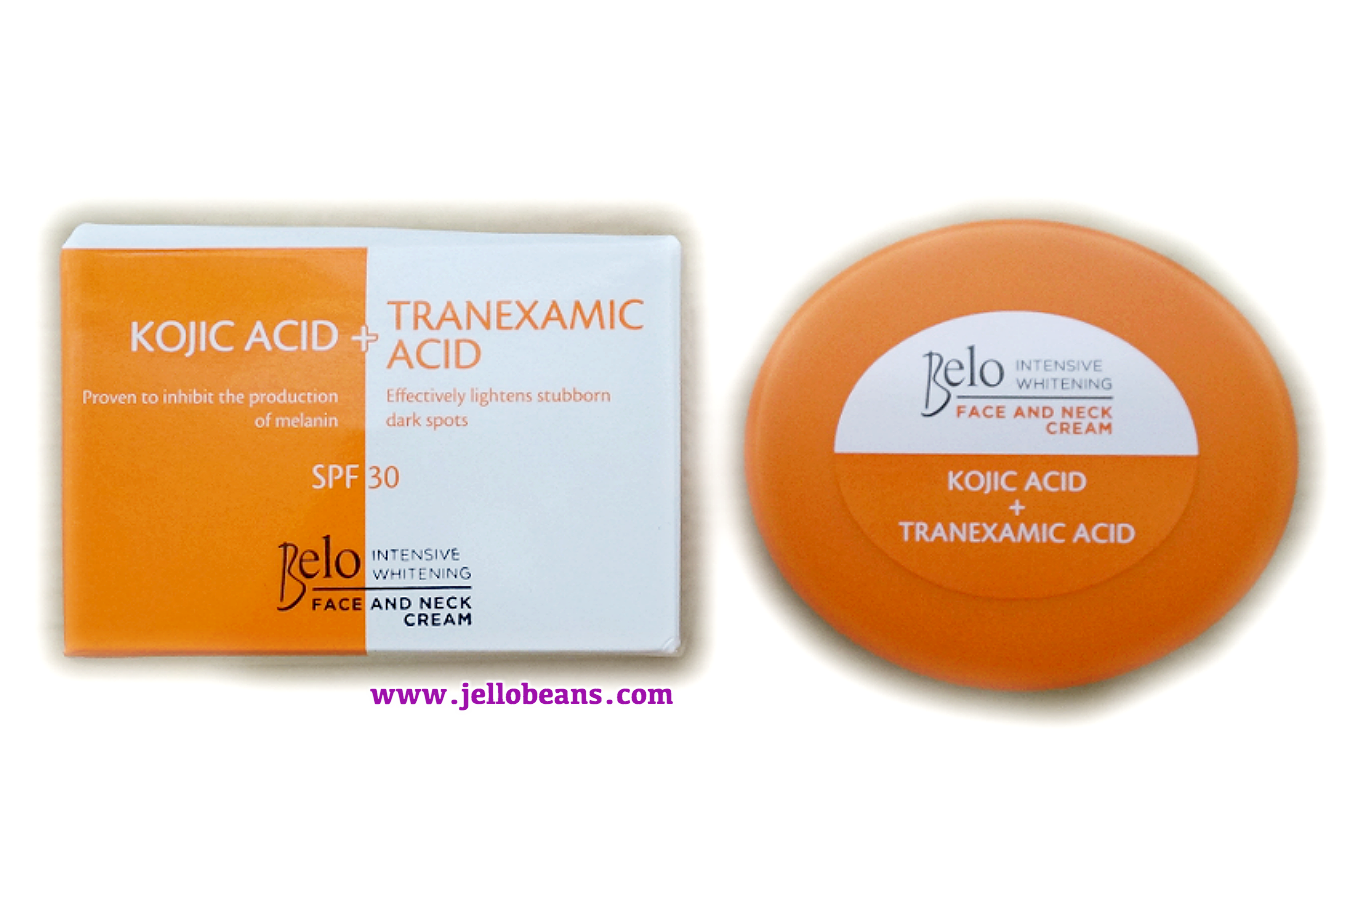 Belo Intensive Whitening Body Cream SPF 30 & Face and Neck 